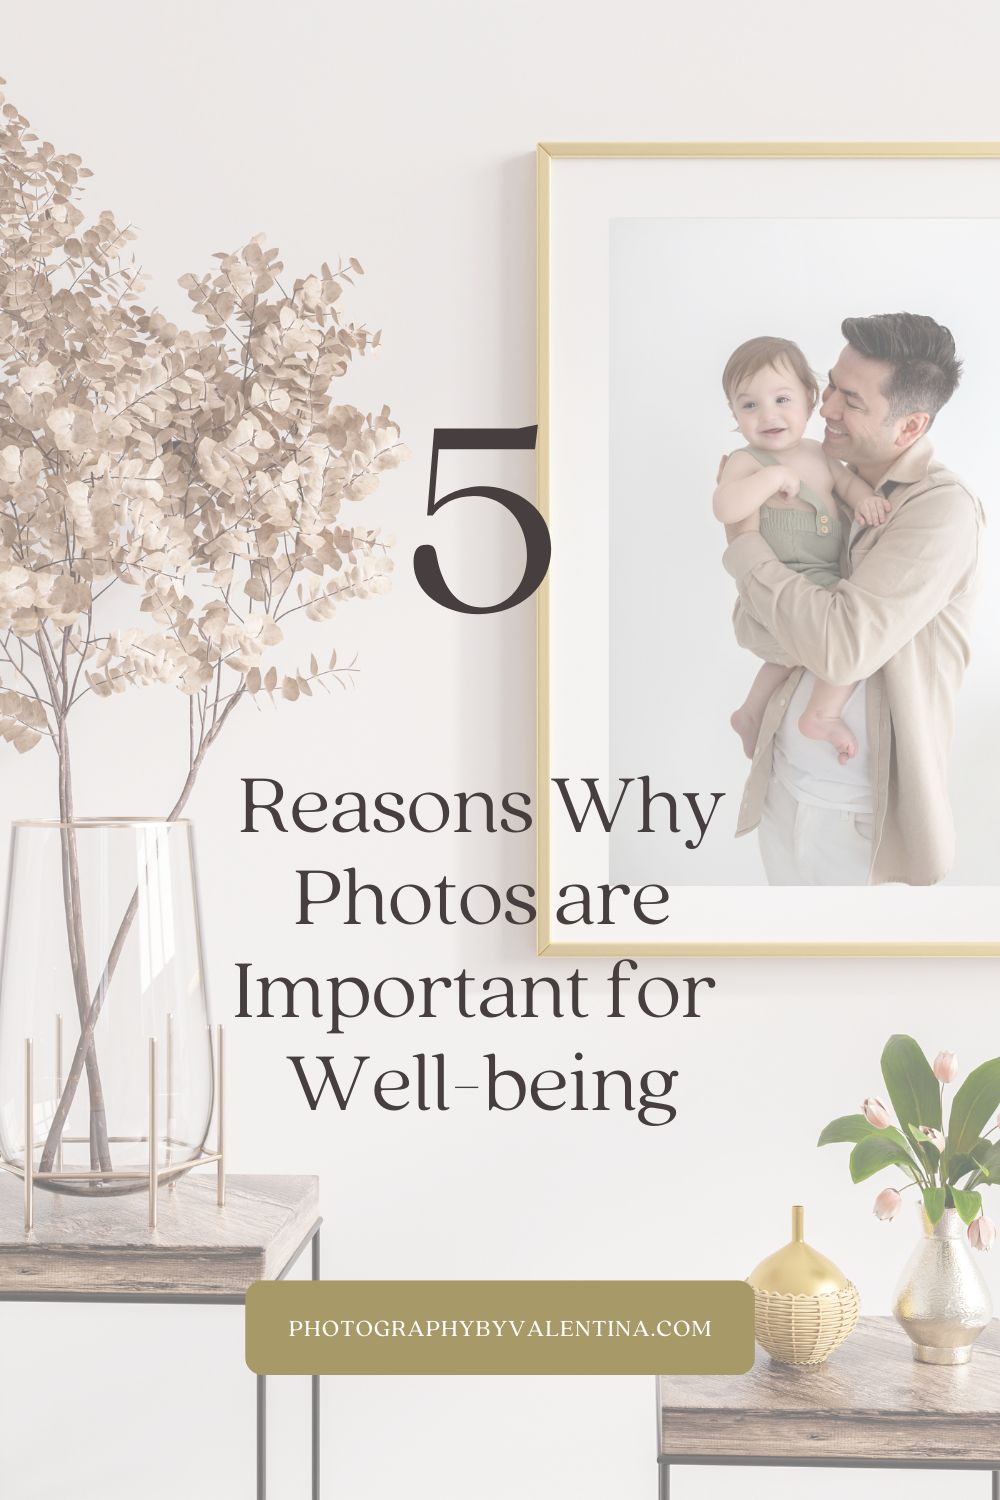 5 reasons why photos are important for well-being